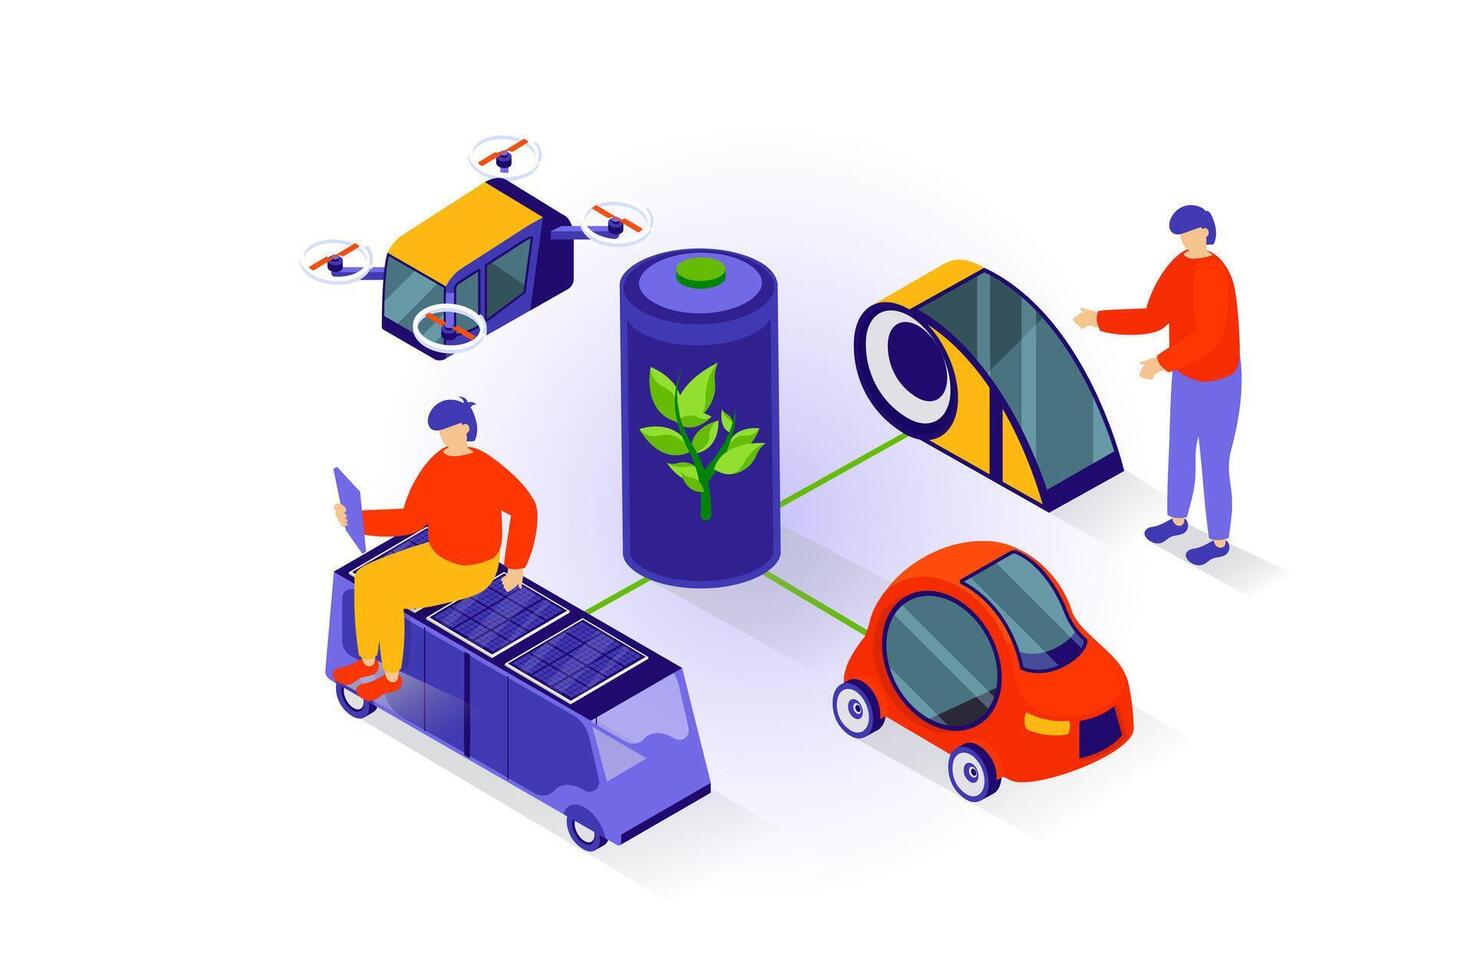 Eco lifestyle concept in 3d isometric design. People using clean green energy with recharge battery for charging electric cars and drones. Vector illustration with isometry scene for web graphic